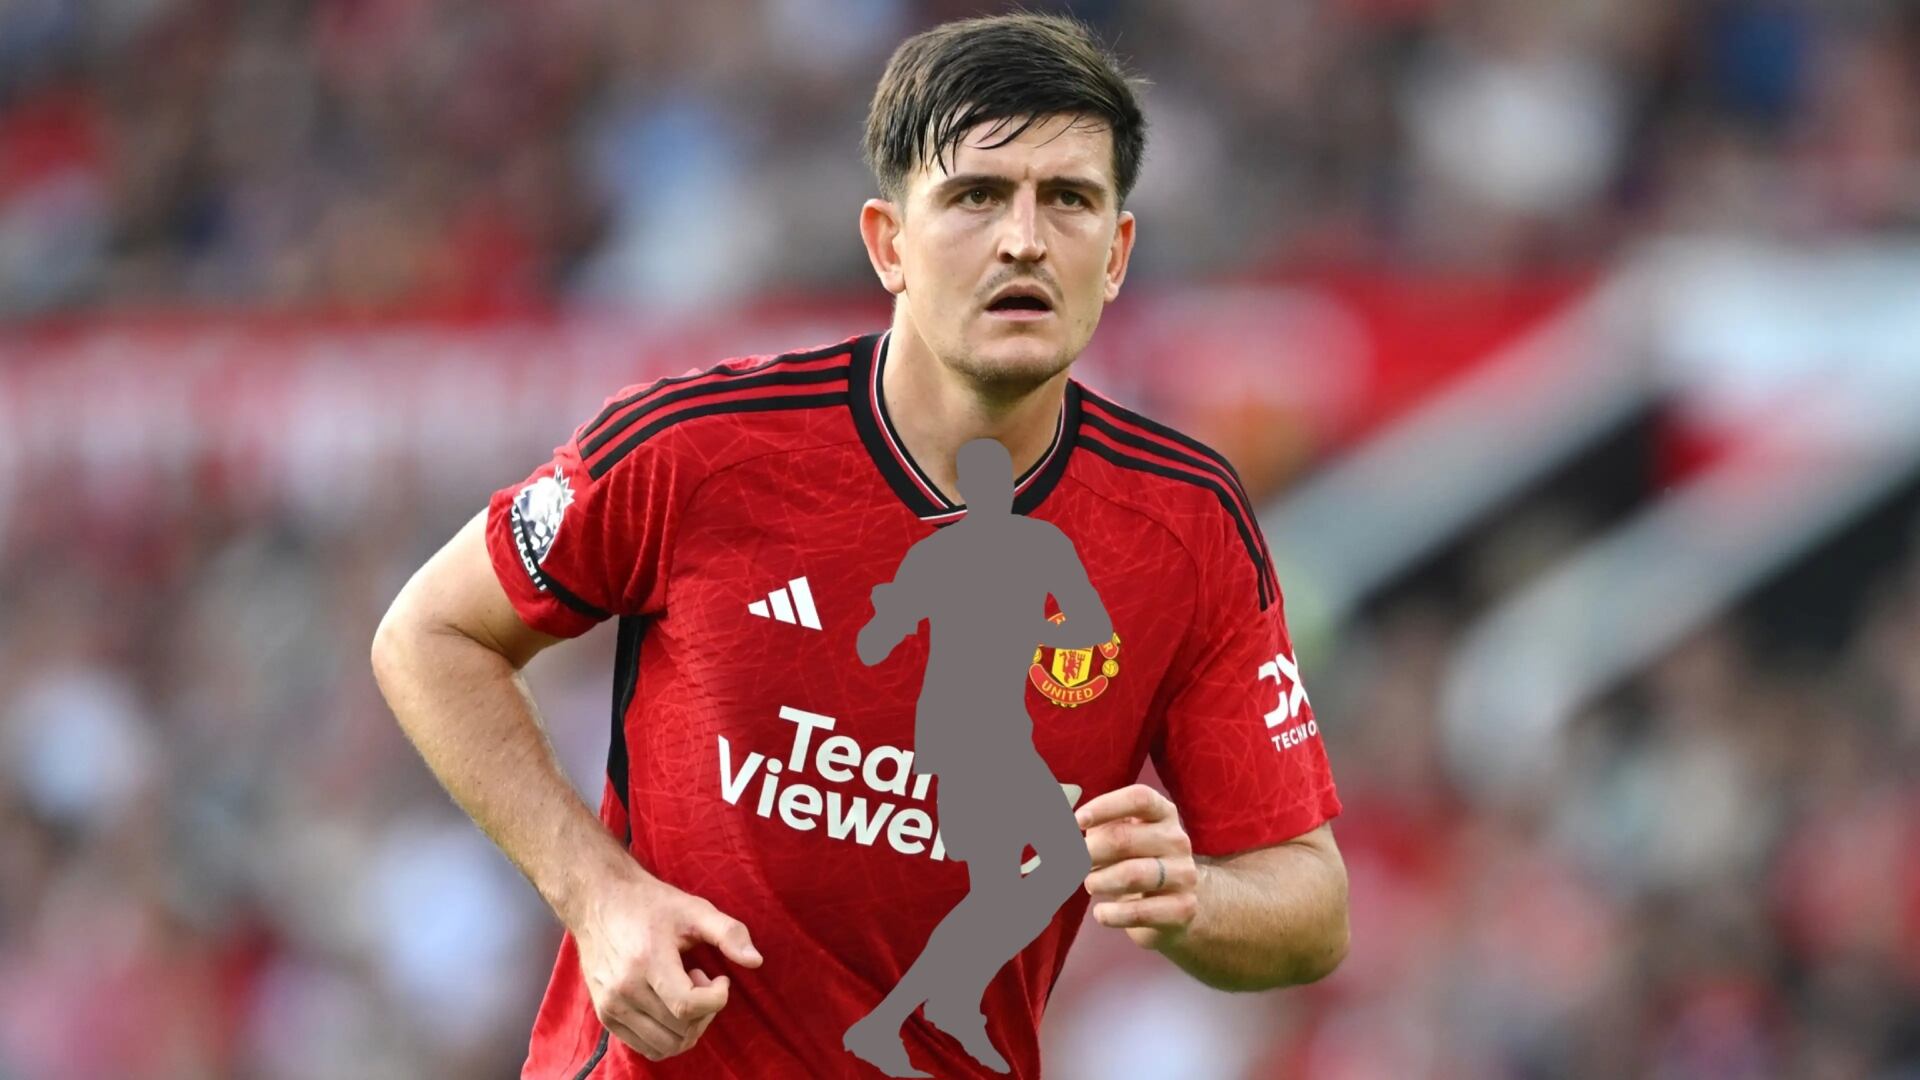 He makes more mistakes than Maguire and yet Man United want to sign him; the Red Devils could make a mistake  